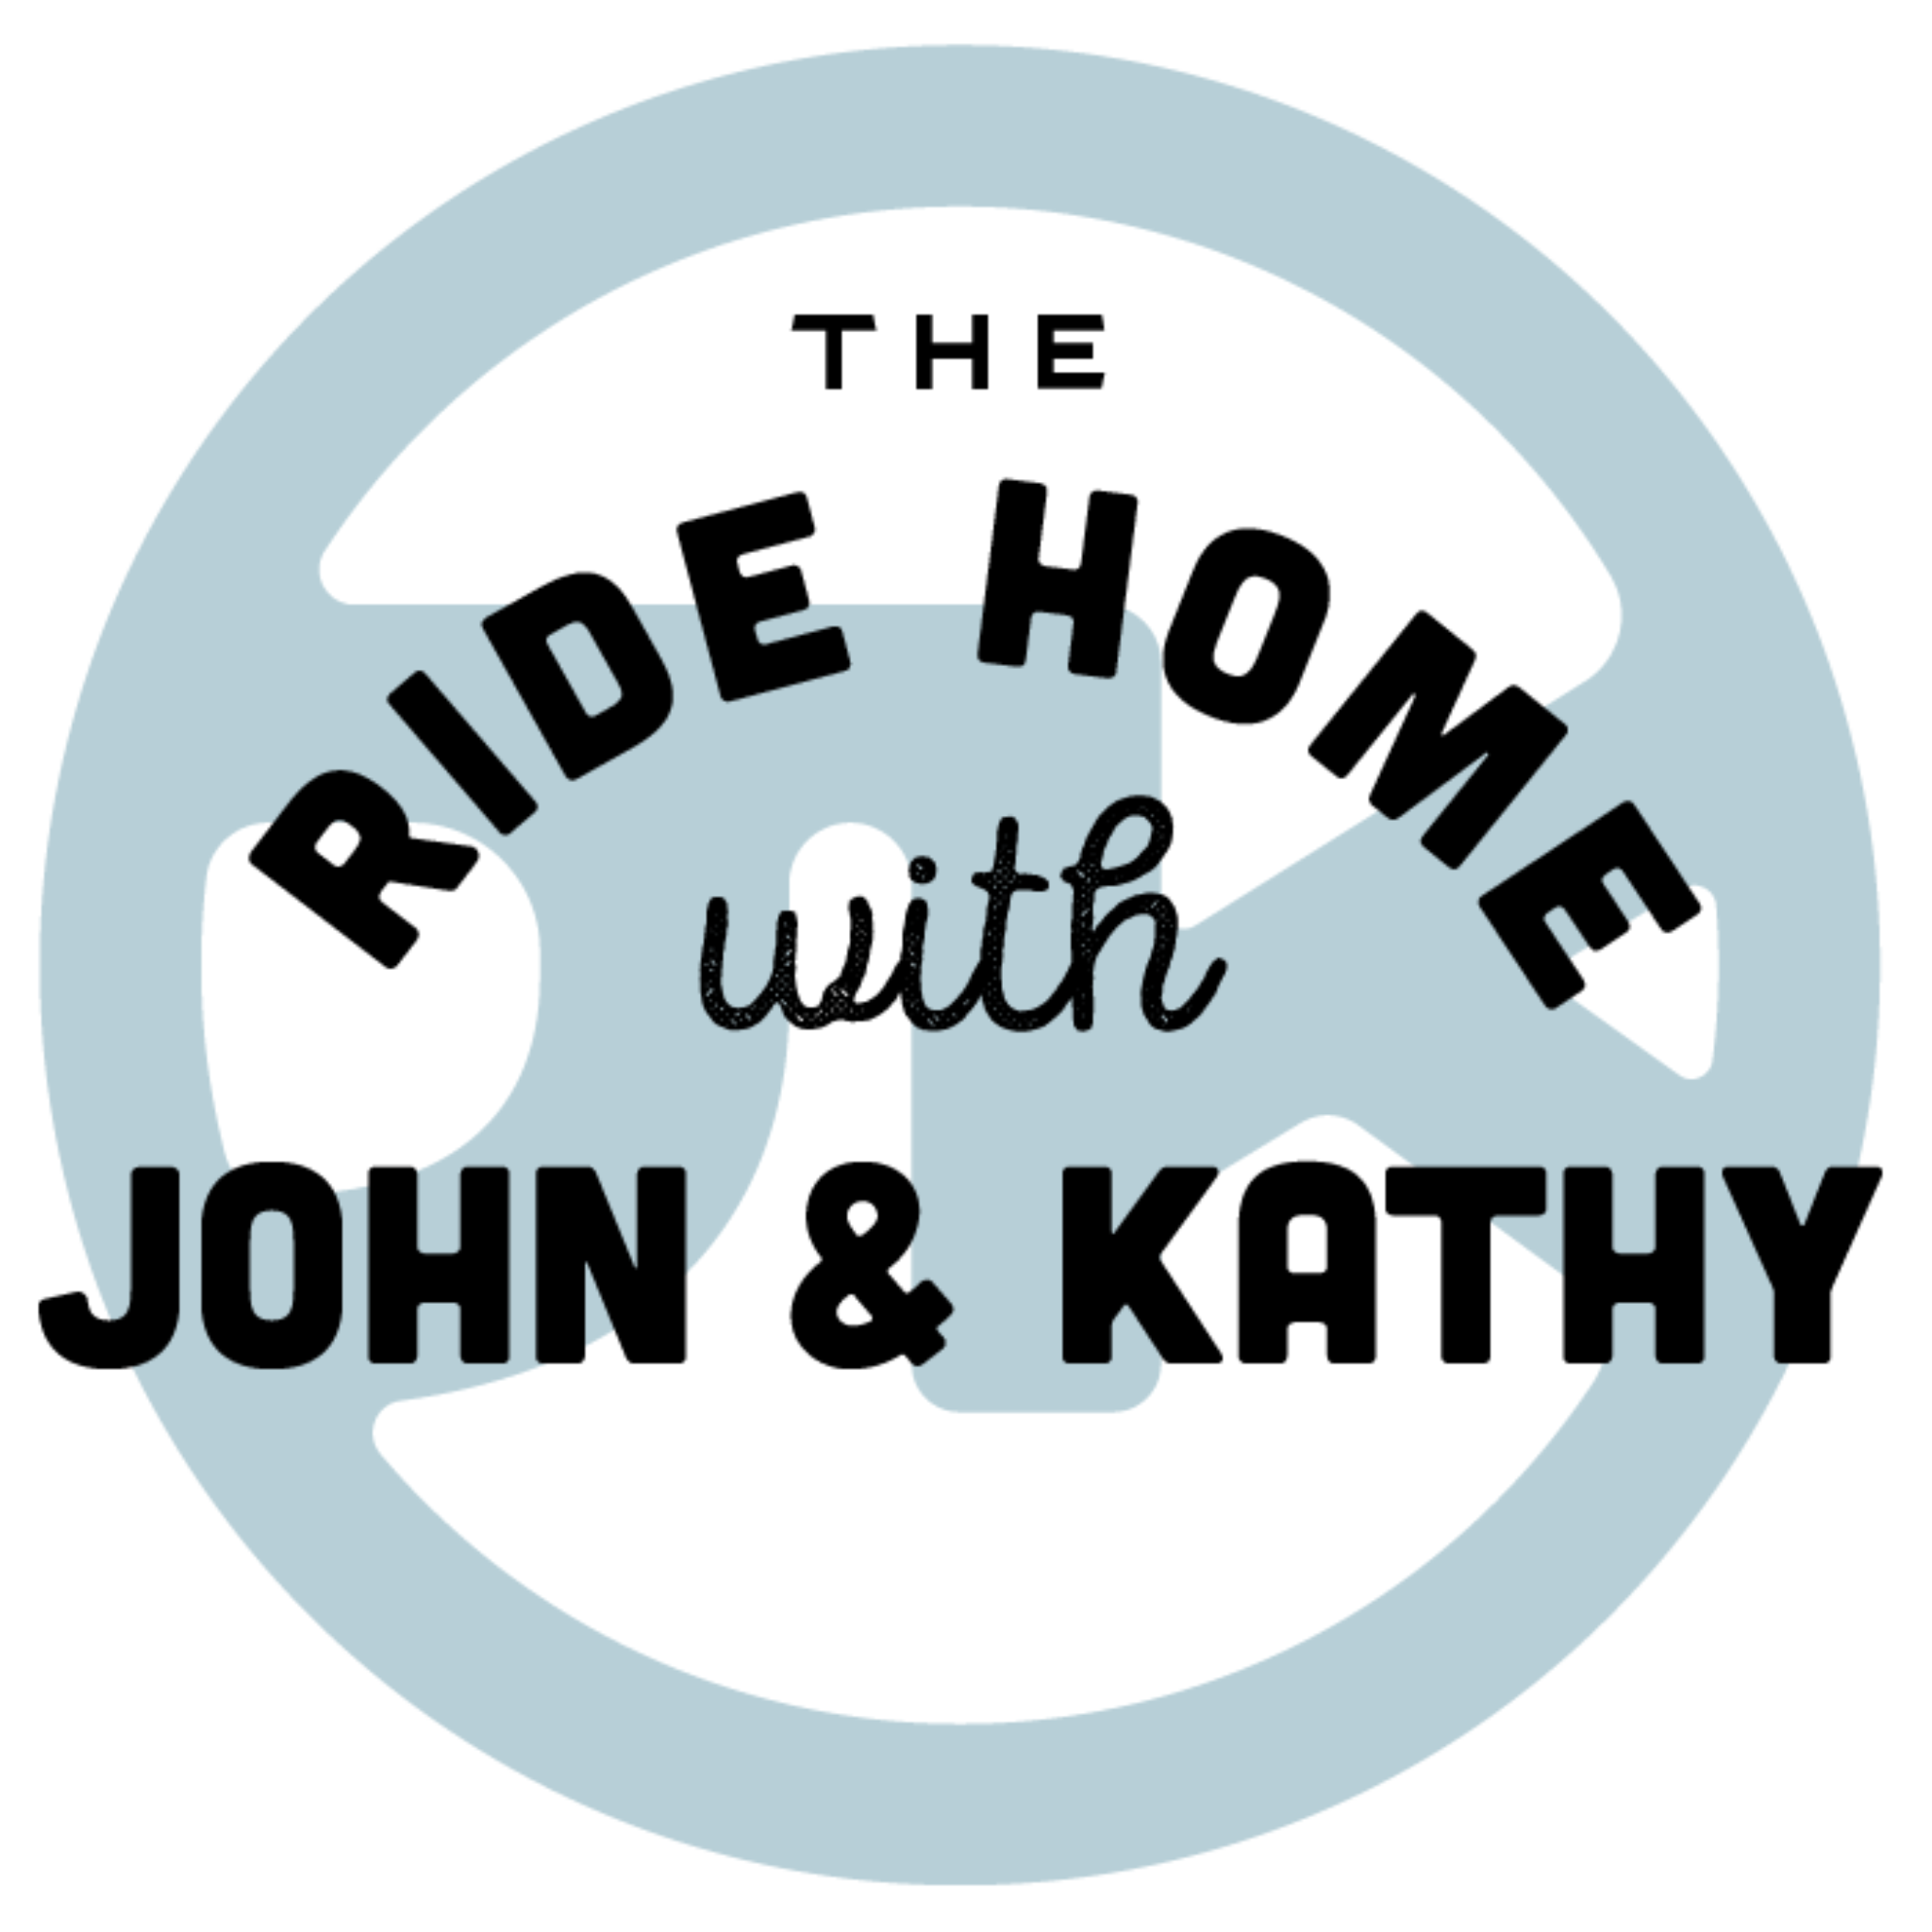 The Ride Home - Wednesday, March 30, 2022